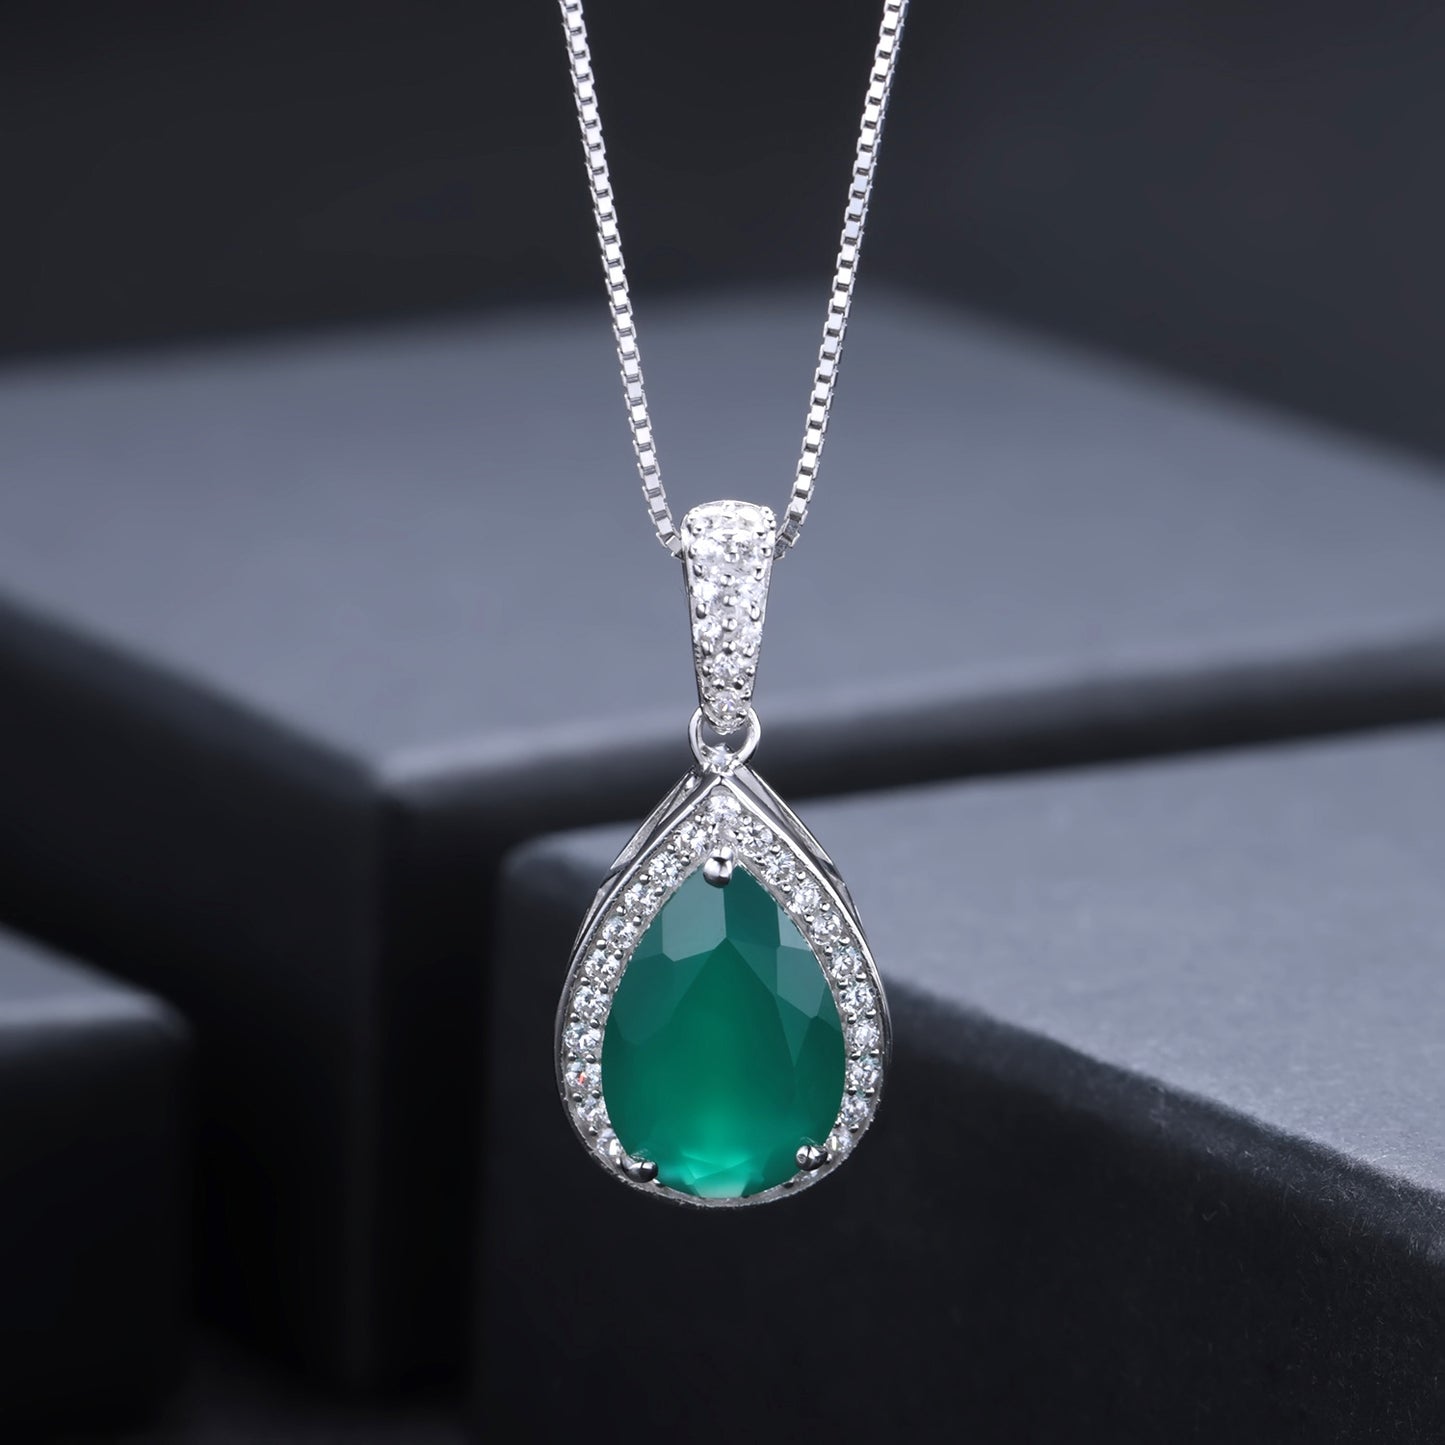 European Design Inlaid Natural Green Agate Soleste Halo Pear Drop Pendant Silver Necklace for Women